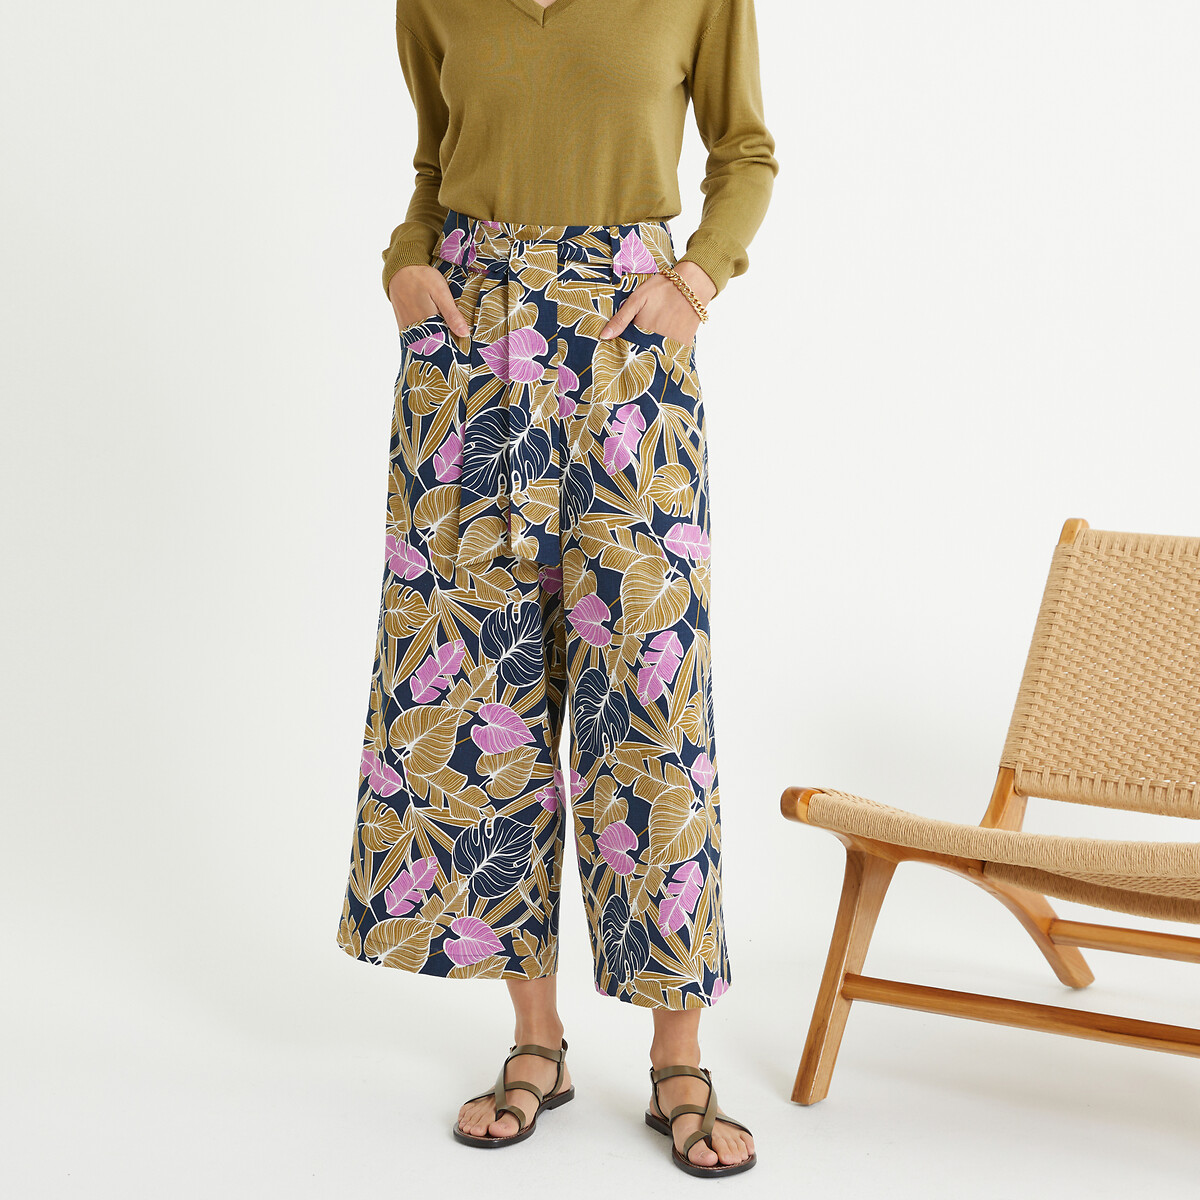 Floral Wide Leg Trousers in Linen Mix, Length 24.5"